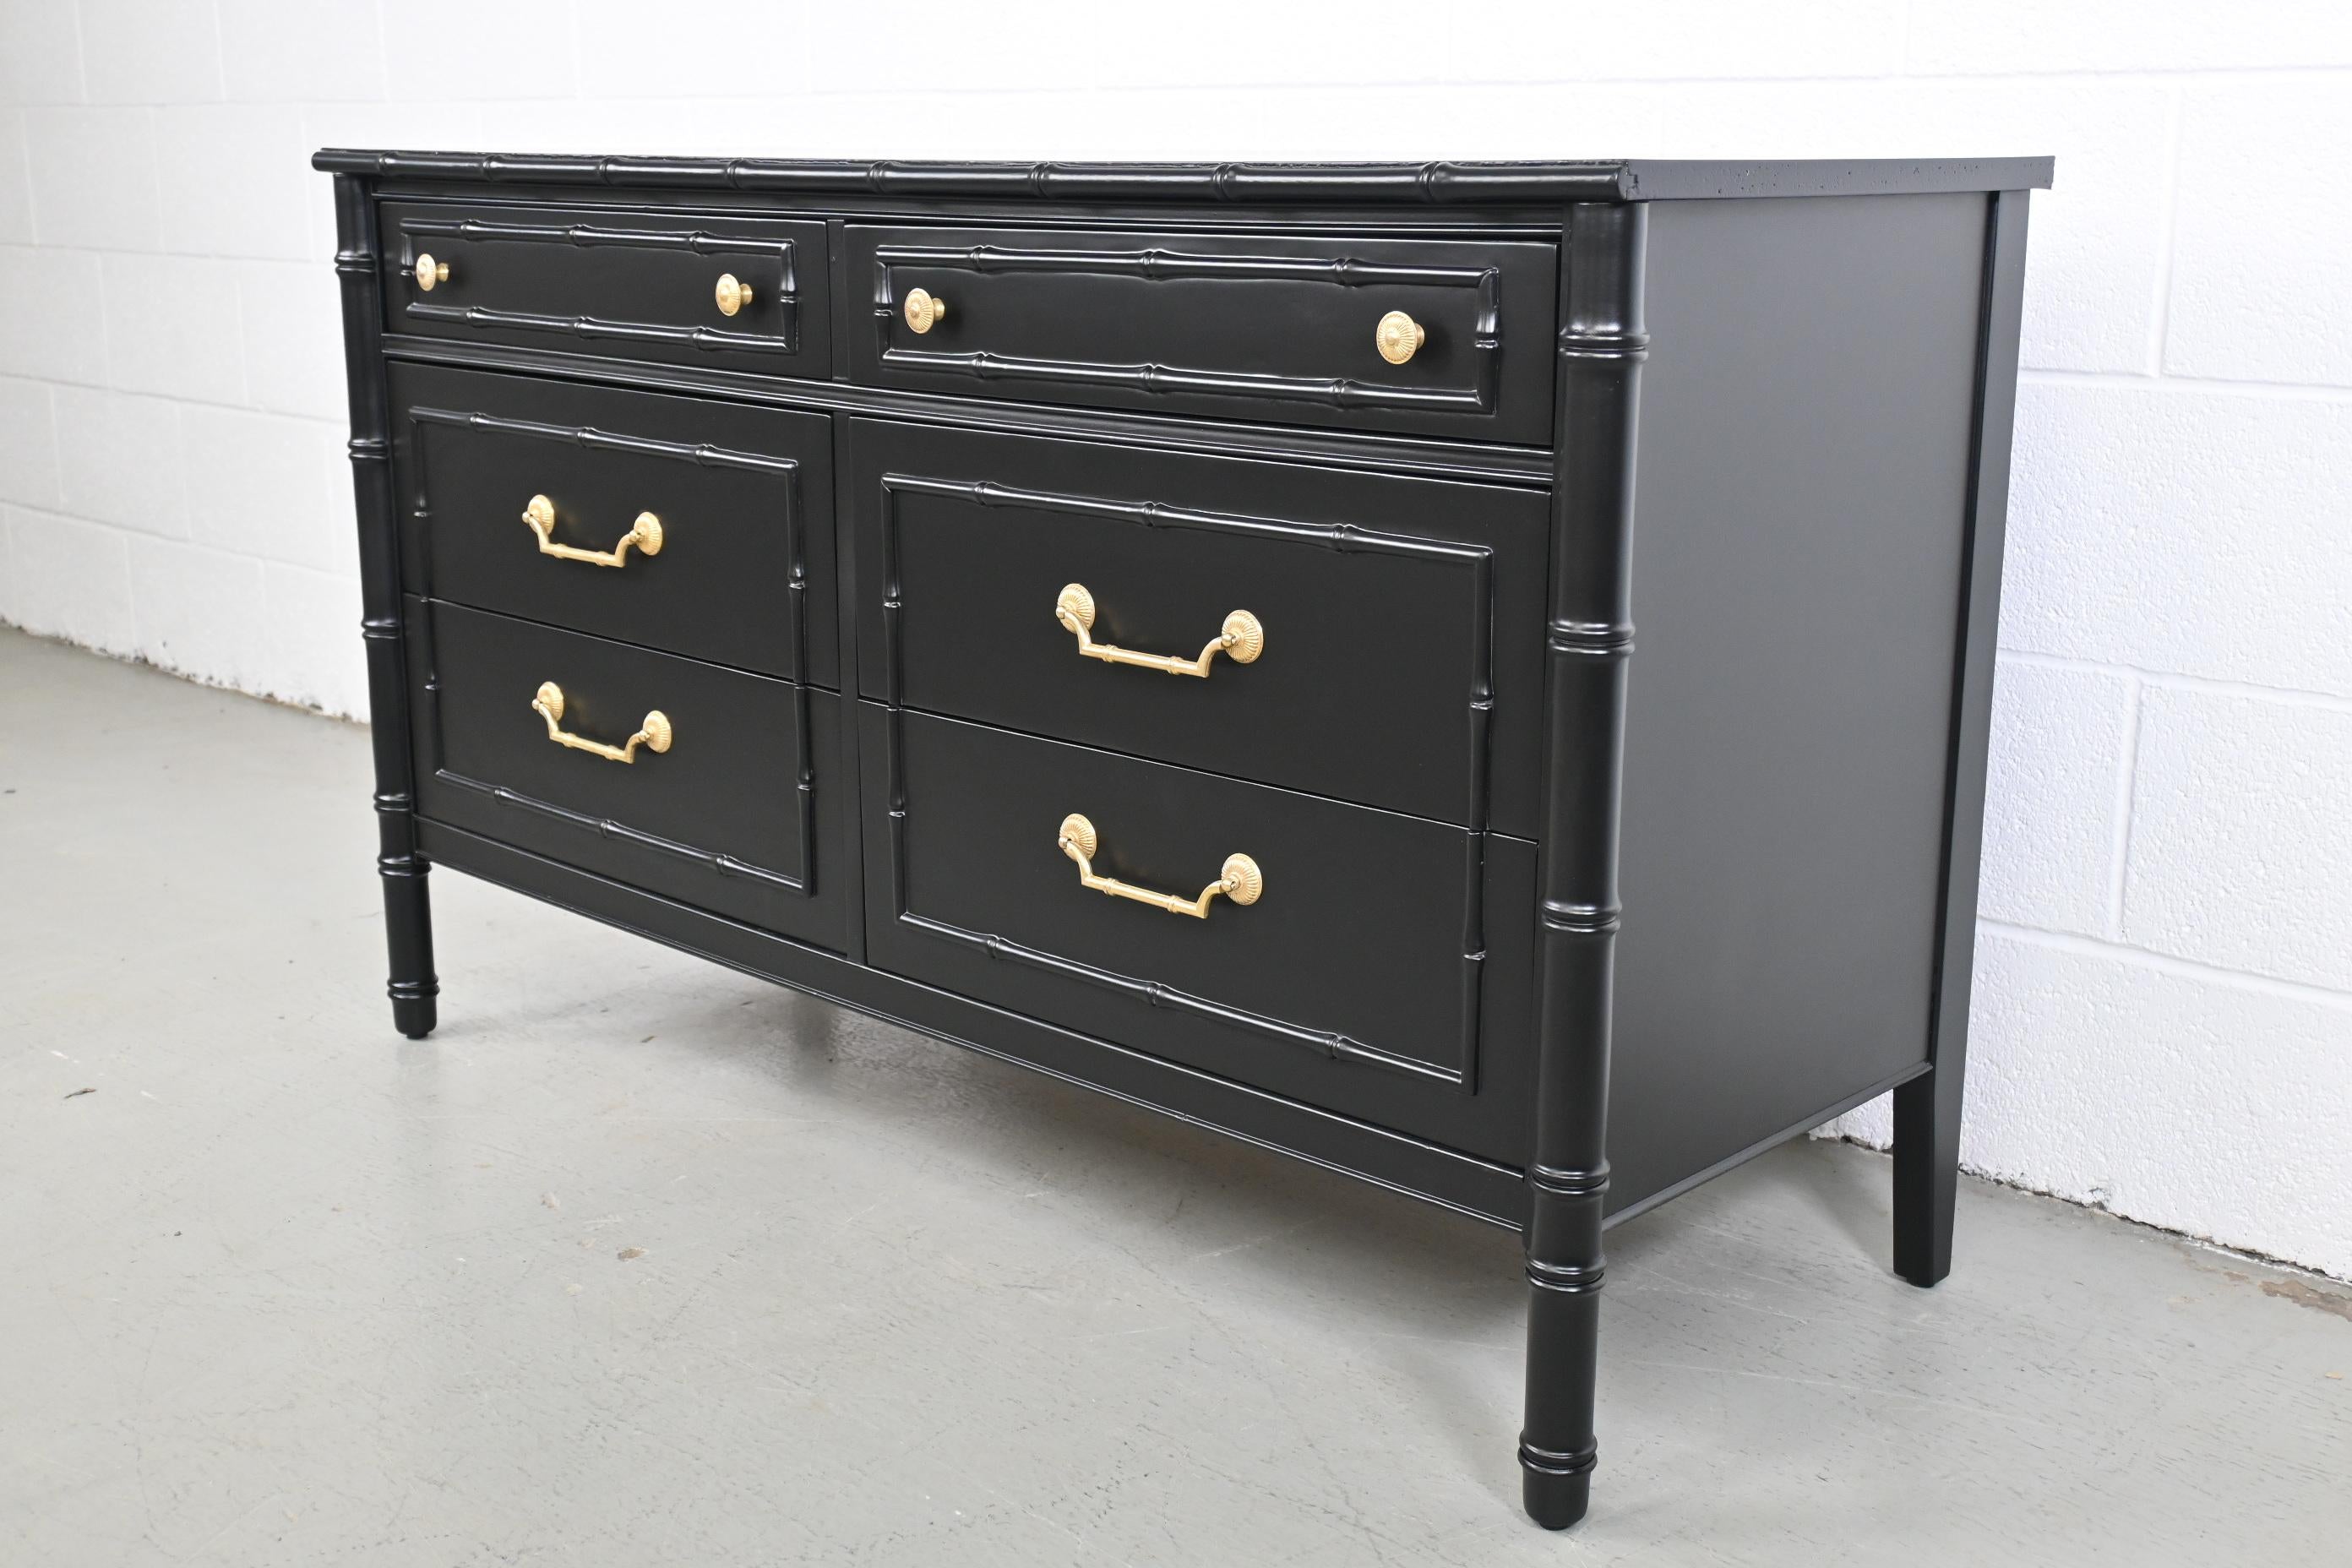 Thomasville Furniture Faux Bamboo Black Lacquered Dresser

Thomasville Furniture, USA, 1960s

Measures: 49.75 Wide x 19 Deep x 30 High

Hollywood Regency style faux bamboo black lacquered dresser with gold hardware.

Professionally